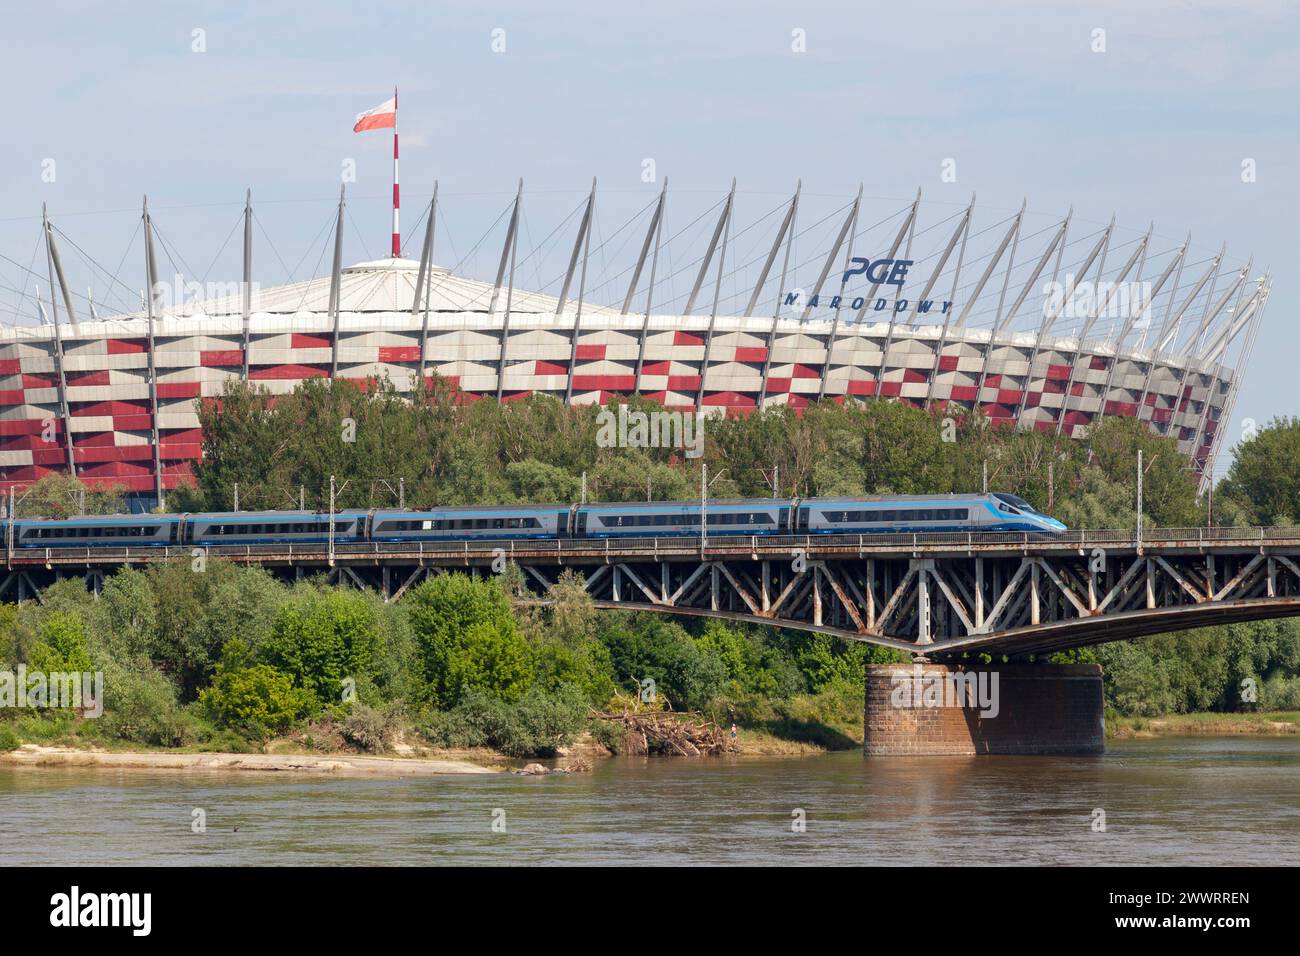 Warsaw, Poland - June 08 2019: A PKP Intercity ED250 Pendolino high-speed train crossing the Średnicowy Bridge over the Vistula River with behind, the Stock Photo